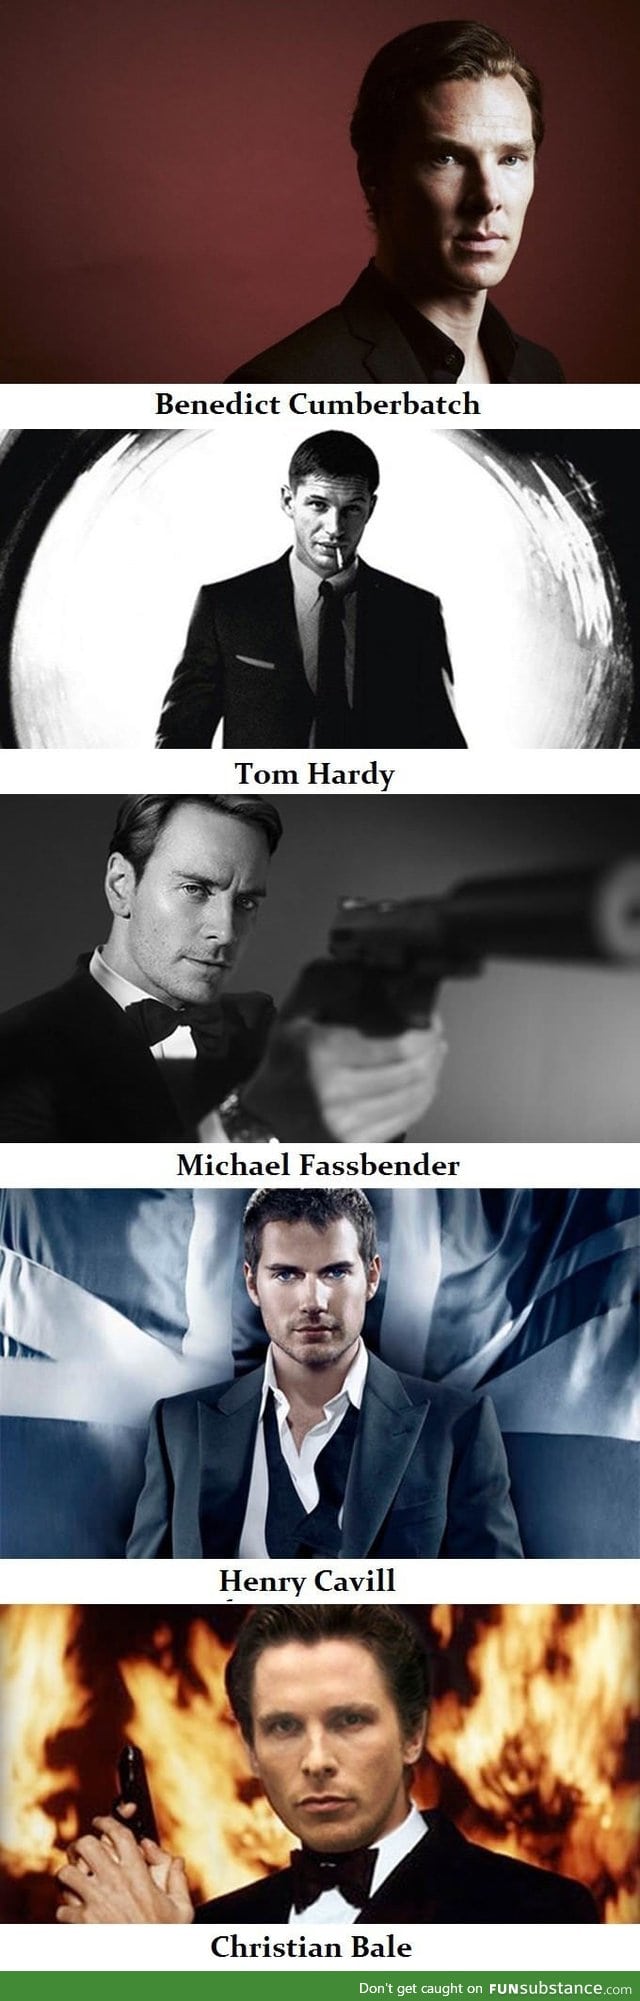 5 actors I'd love to see in the next James Bond movie